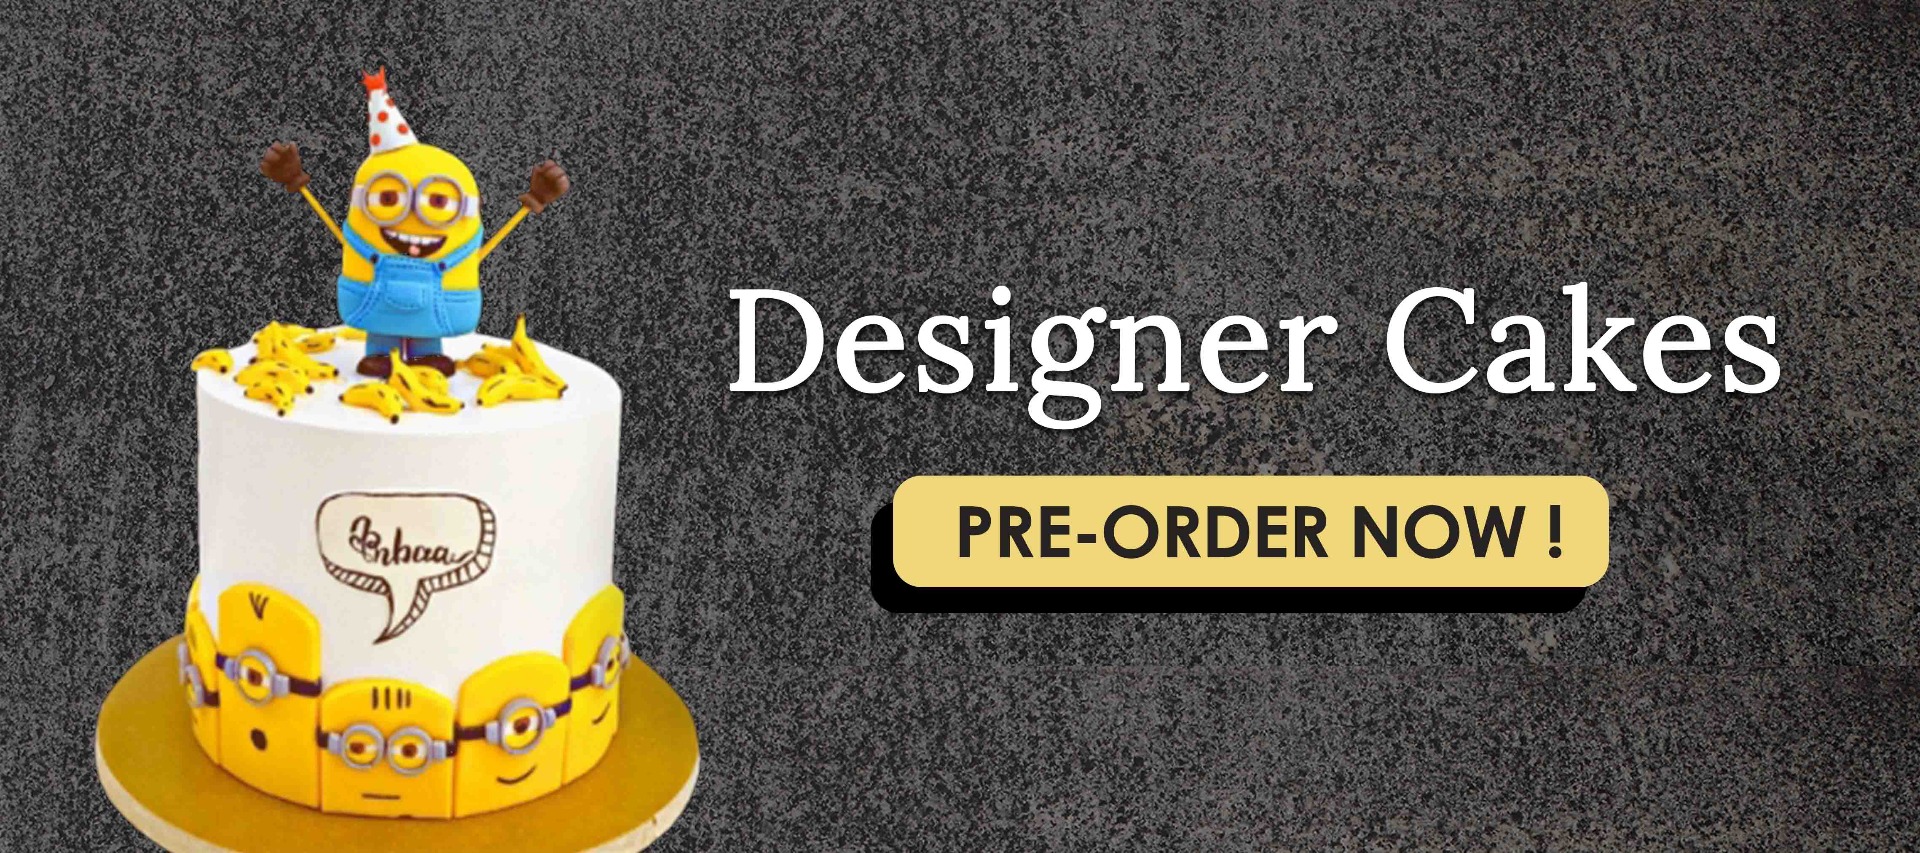 Send Online Cakes to Chennai - Cakes Delivery in Chennai | Myfloralkart